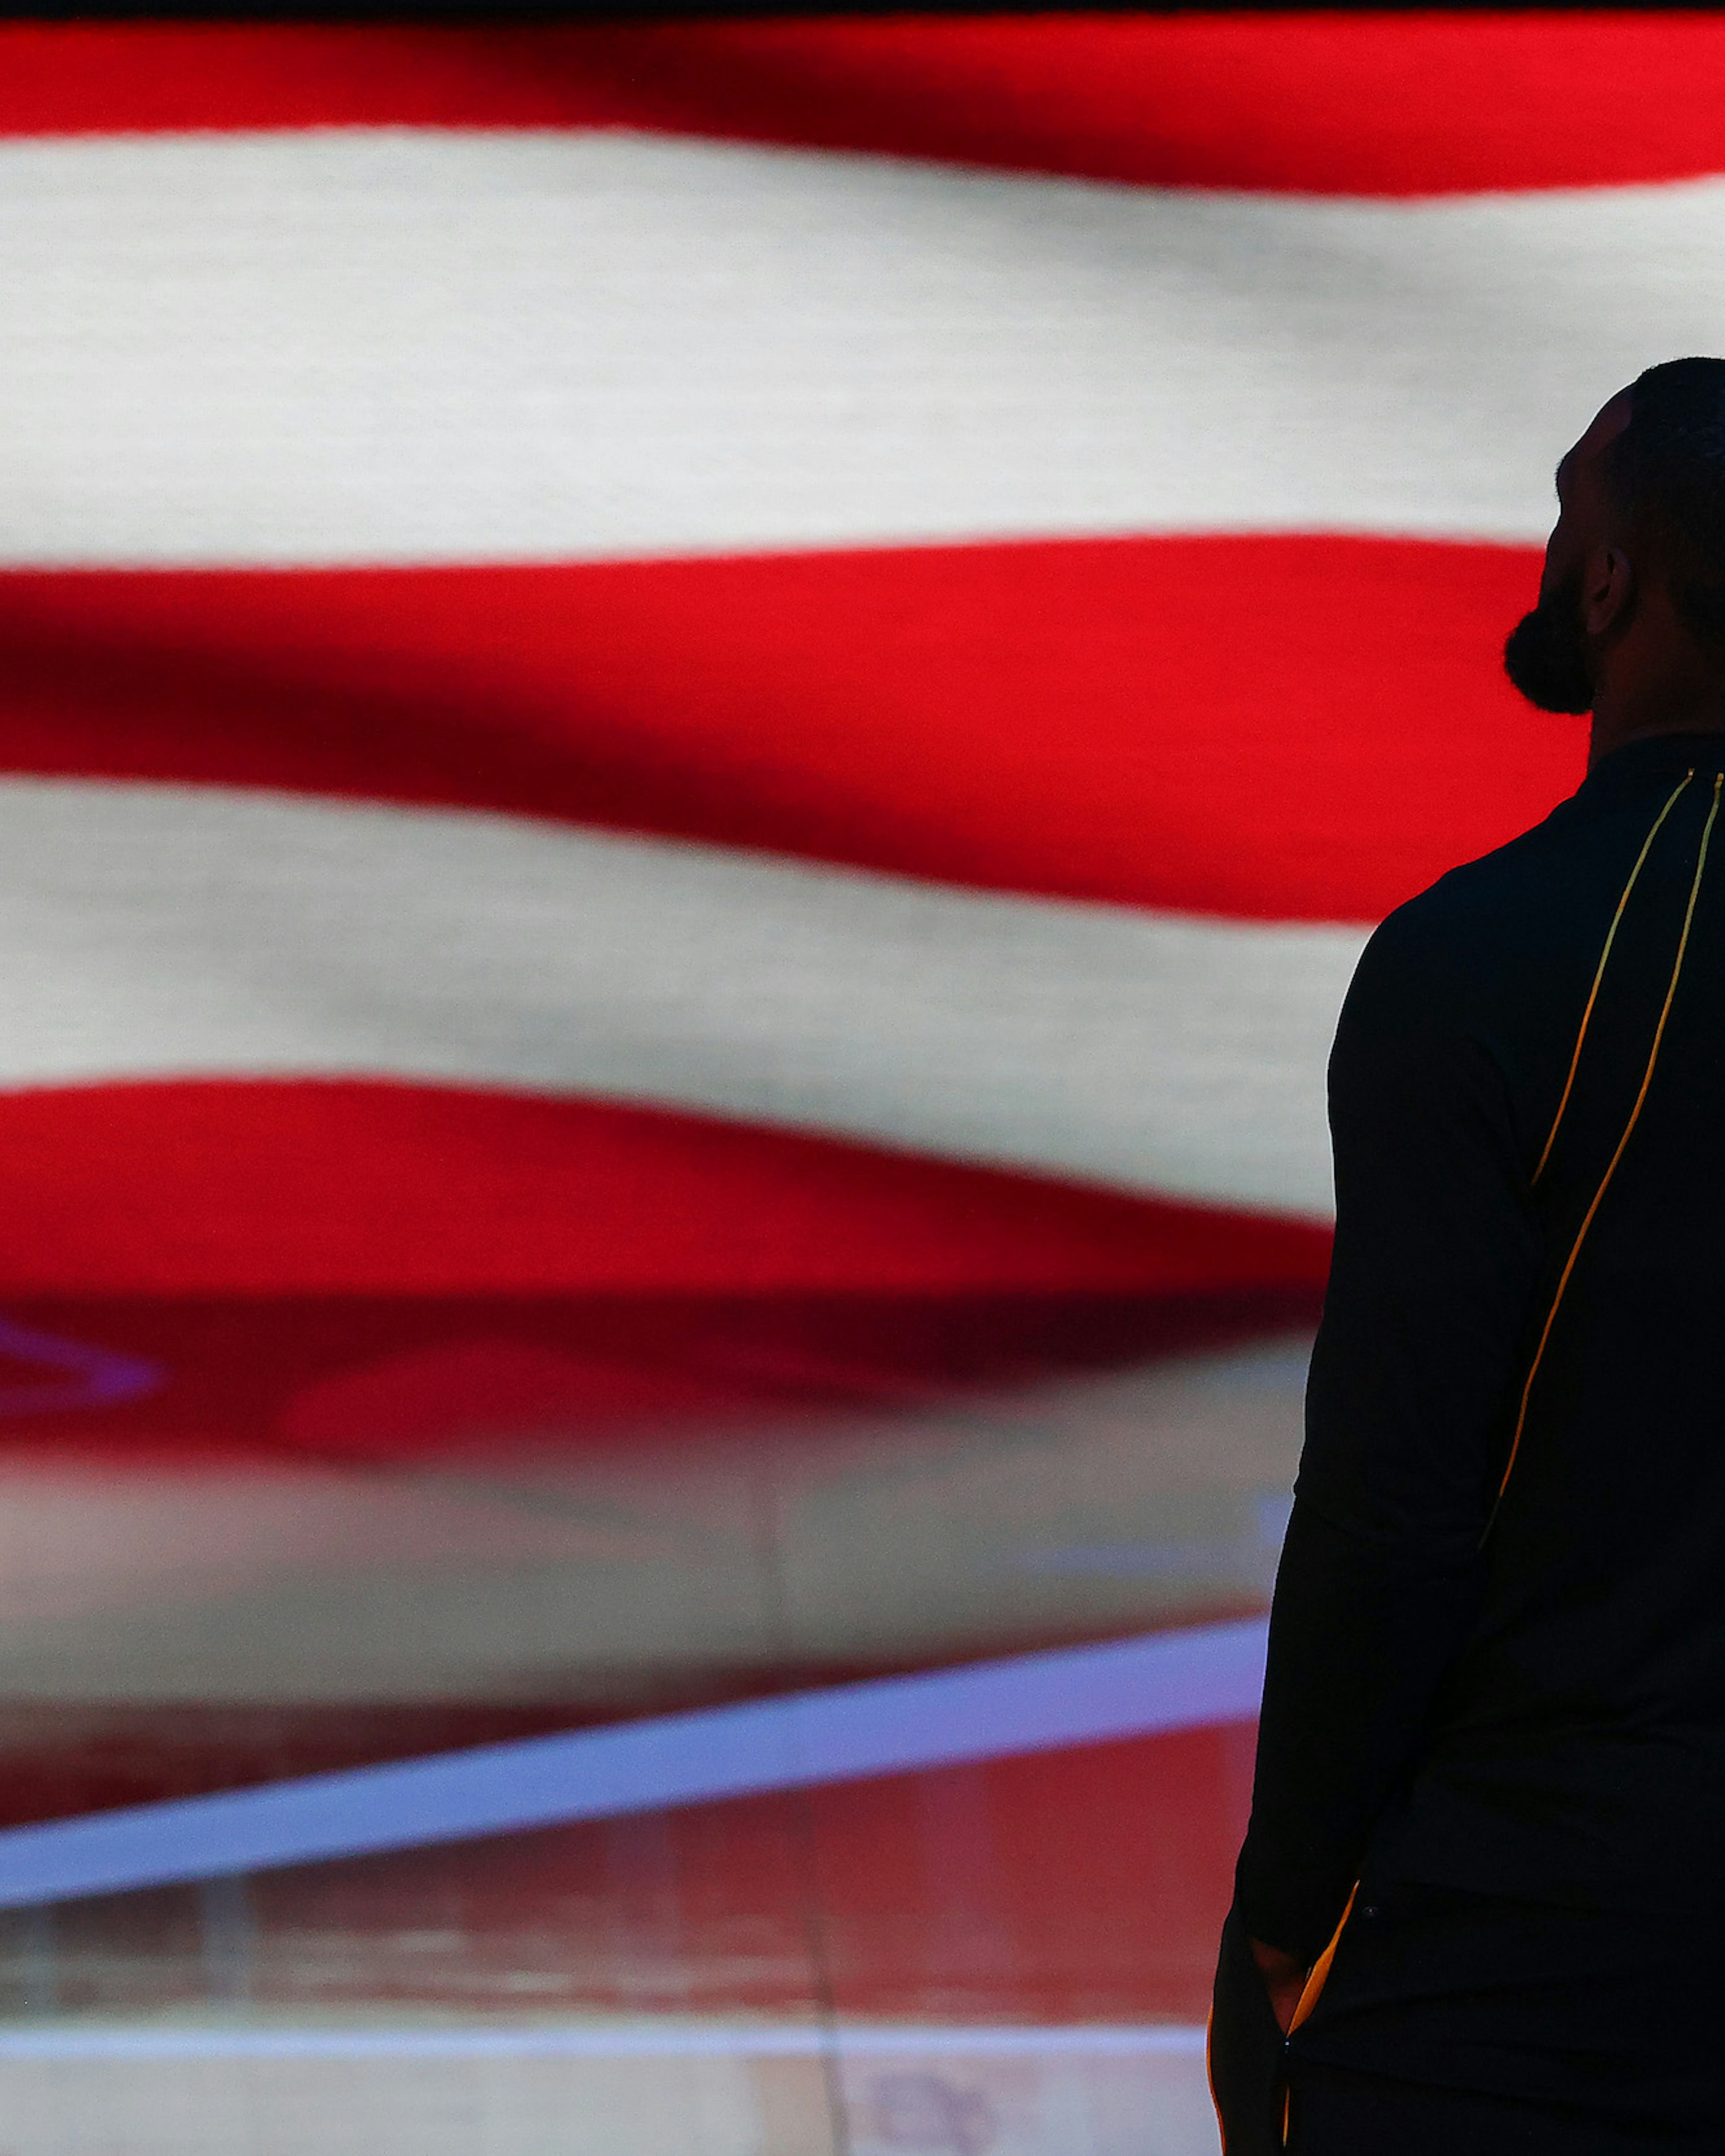 Lebron James #23 of Team LeBron stands for the national anthem prior to the 70th NBA All-Star Game at State Farm Arena on March 07, 2021 in Atlanta, Georgia. (Photo by Kevin C. Cox/Getty Images)